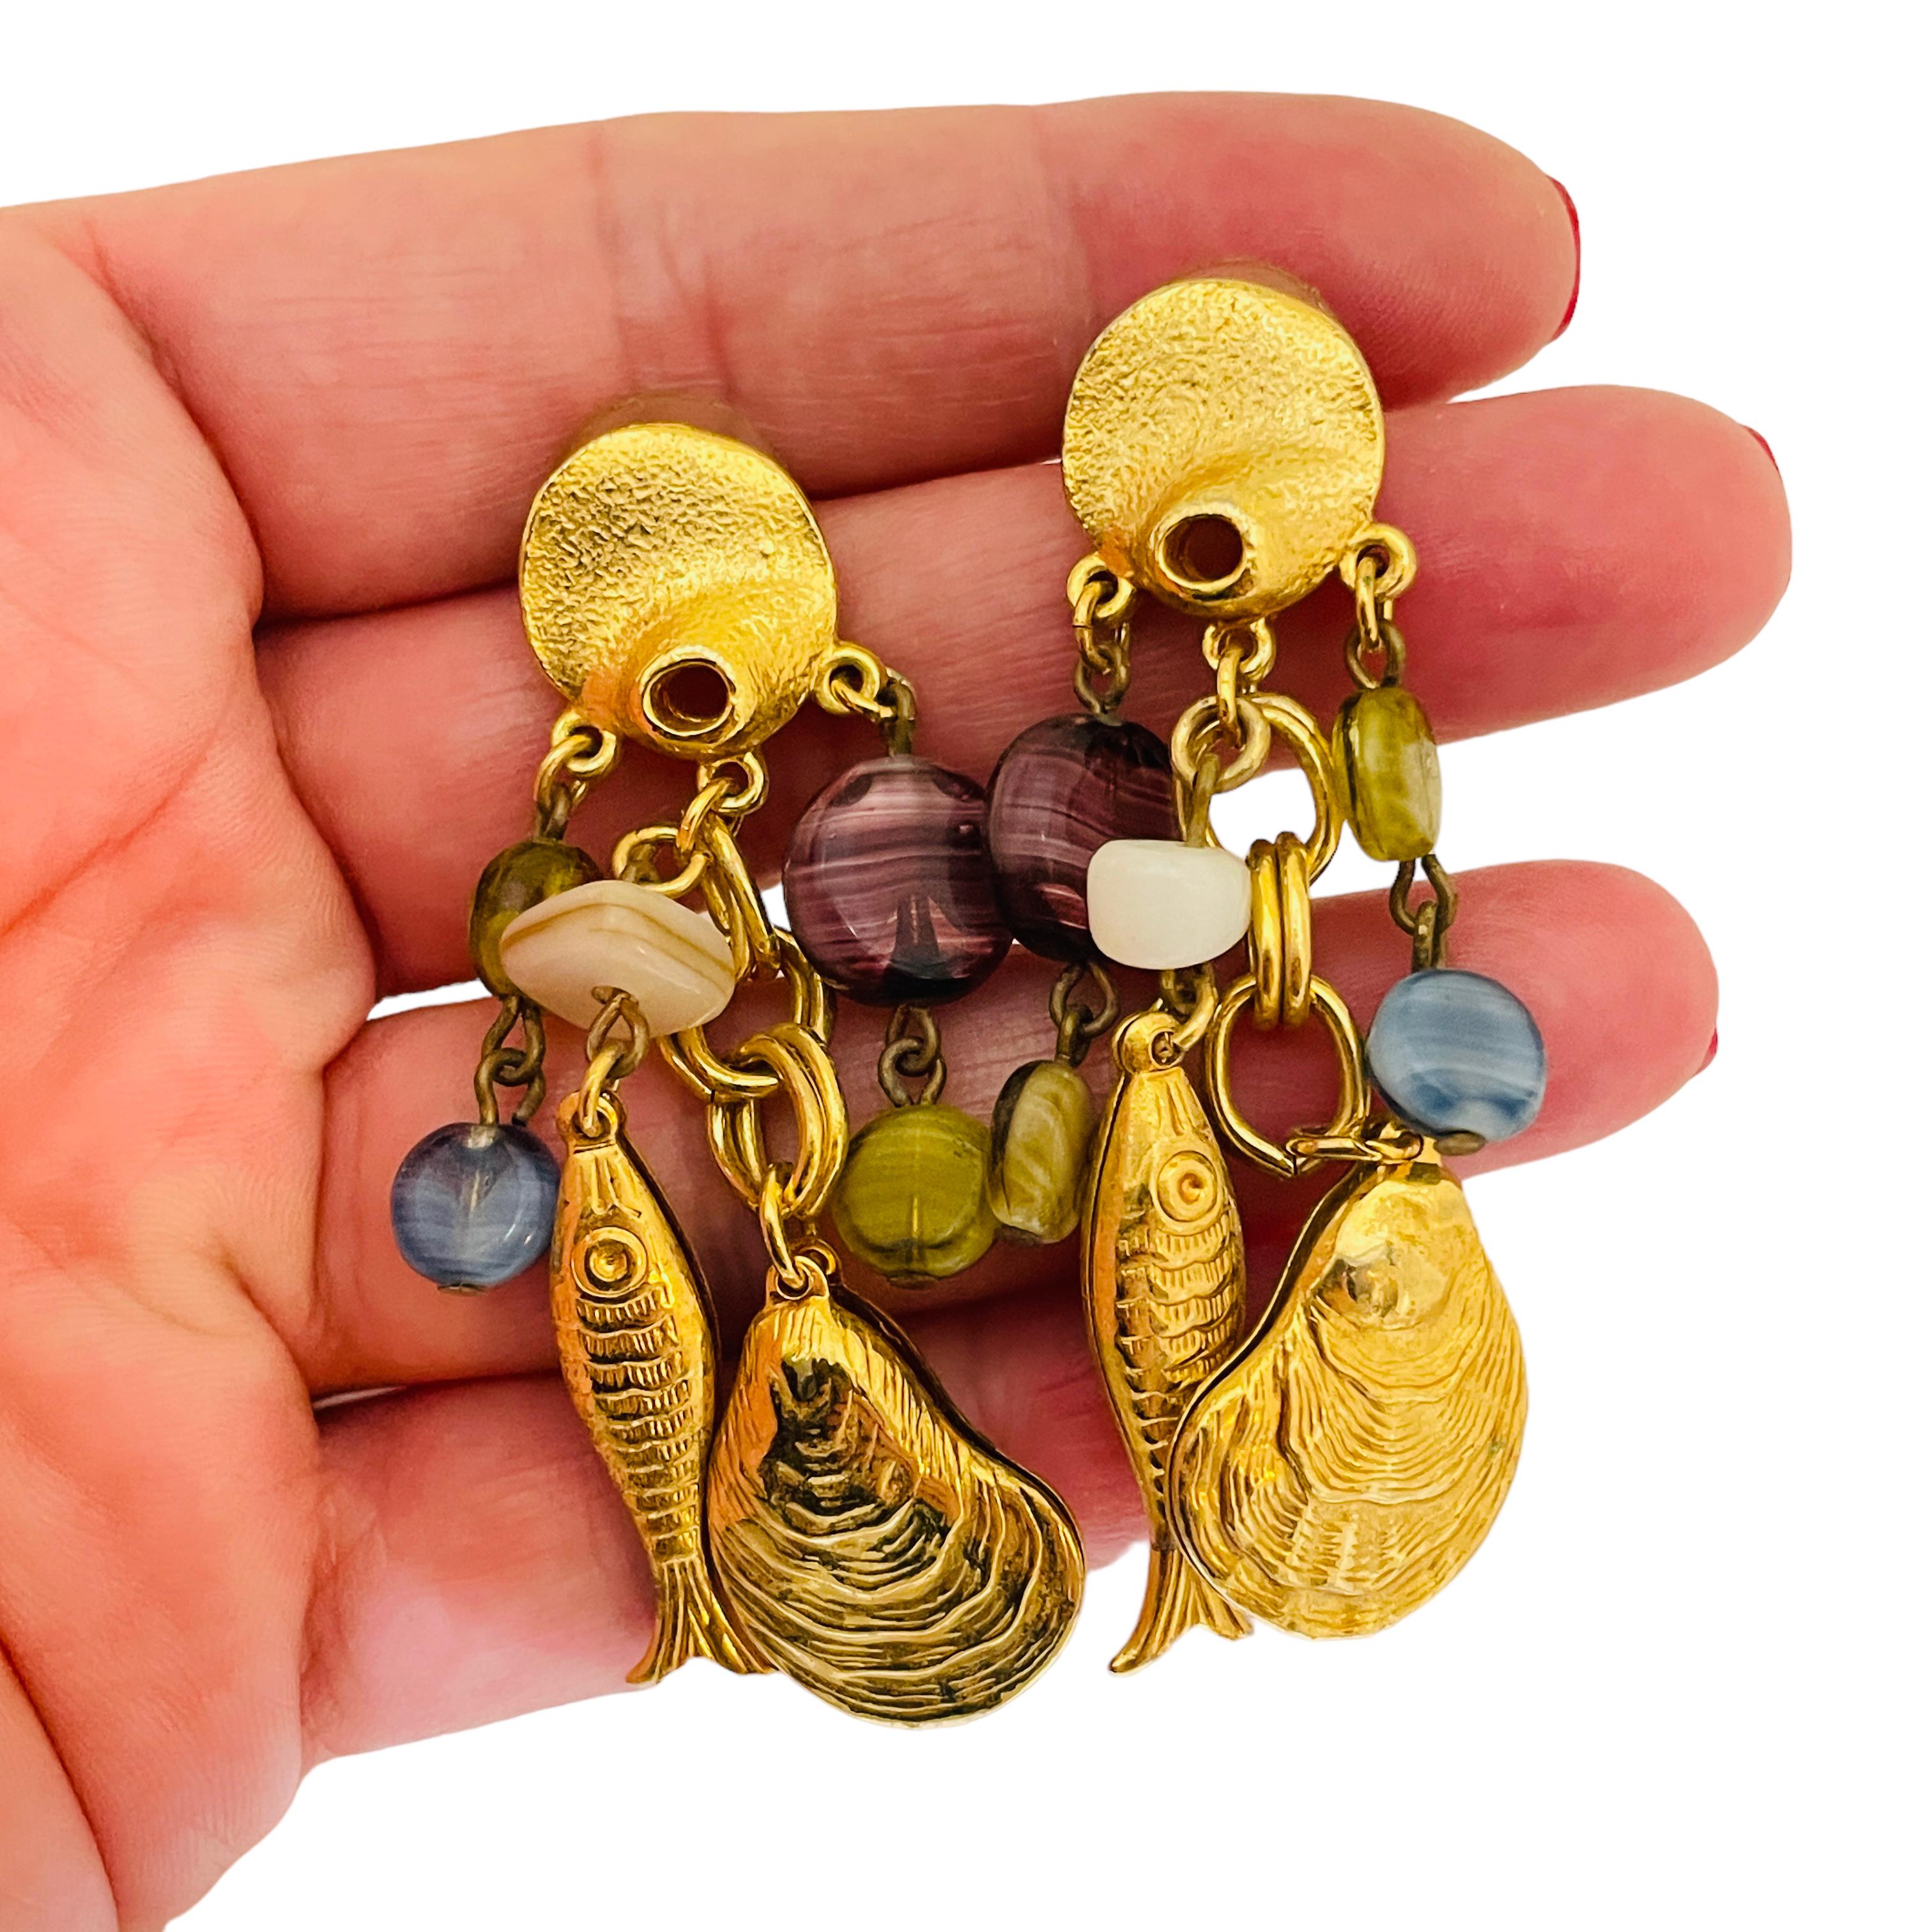 Vintage gold glass dangle seashells 80’s earrings   In Excellent Condition For Sale In Palos Hills, IL